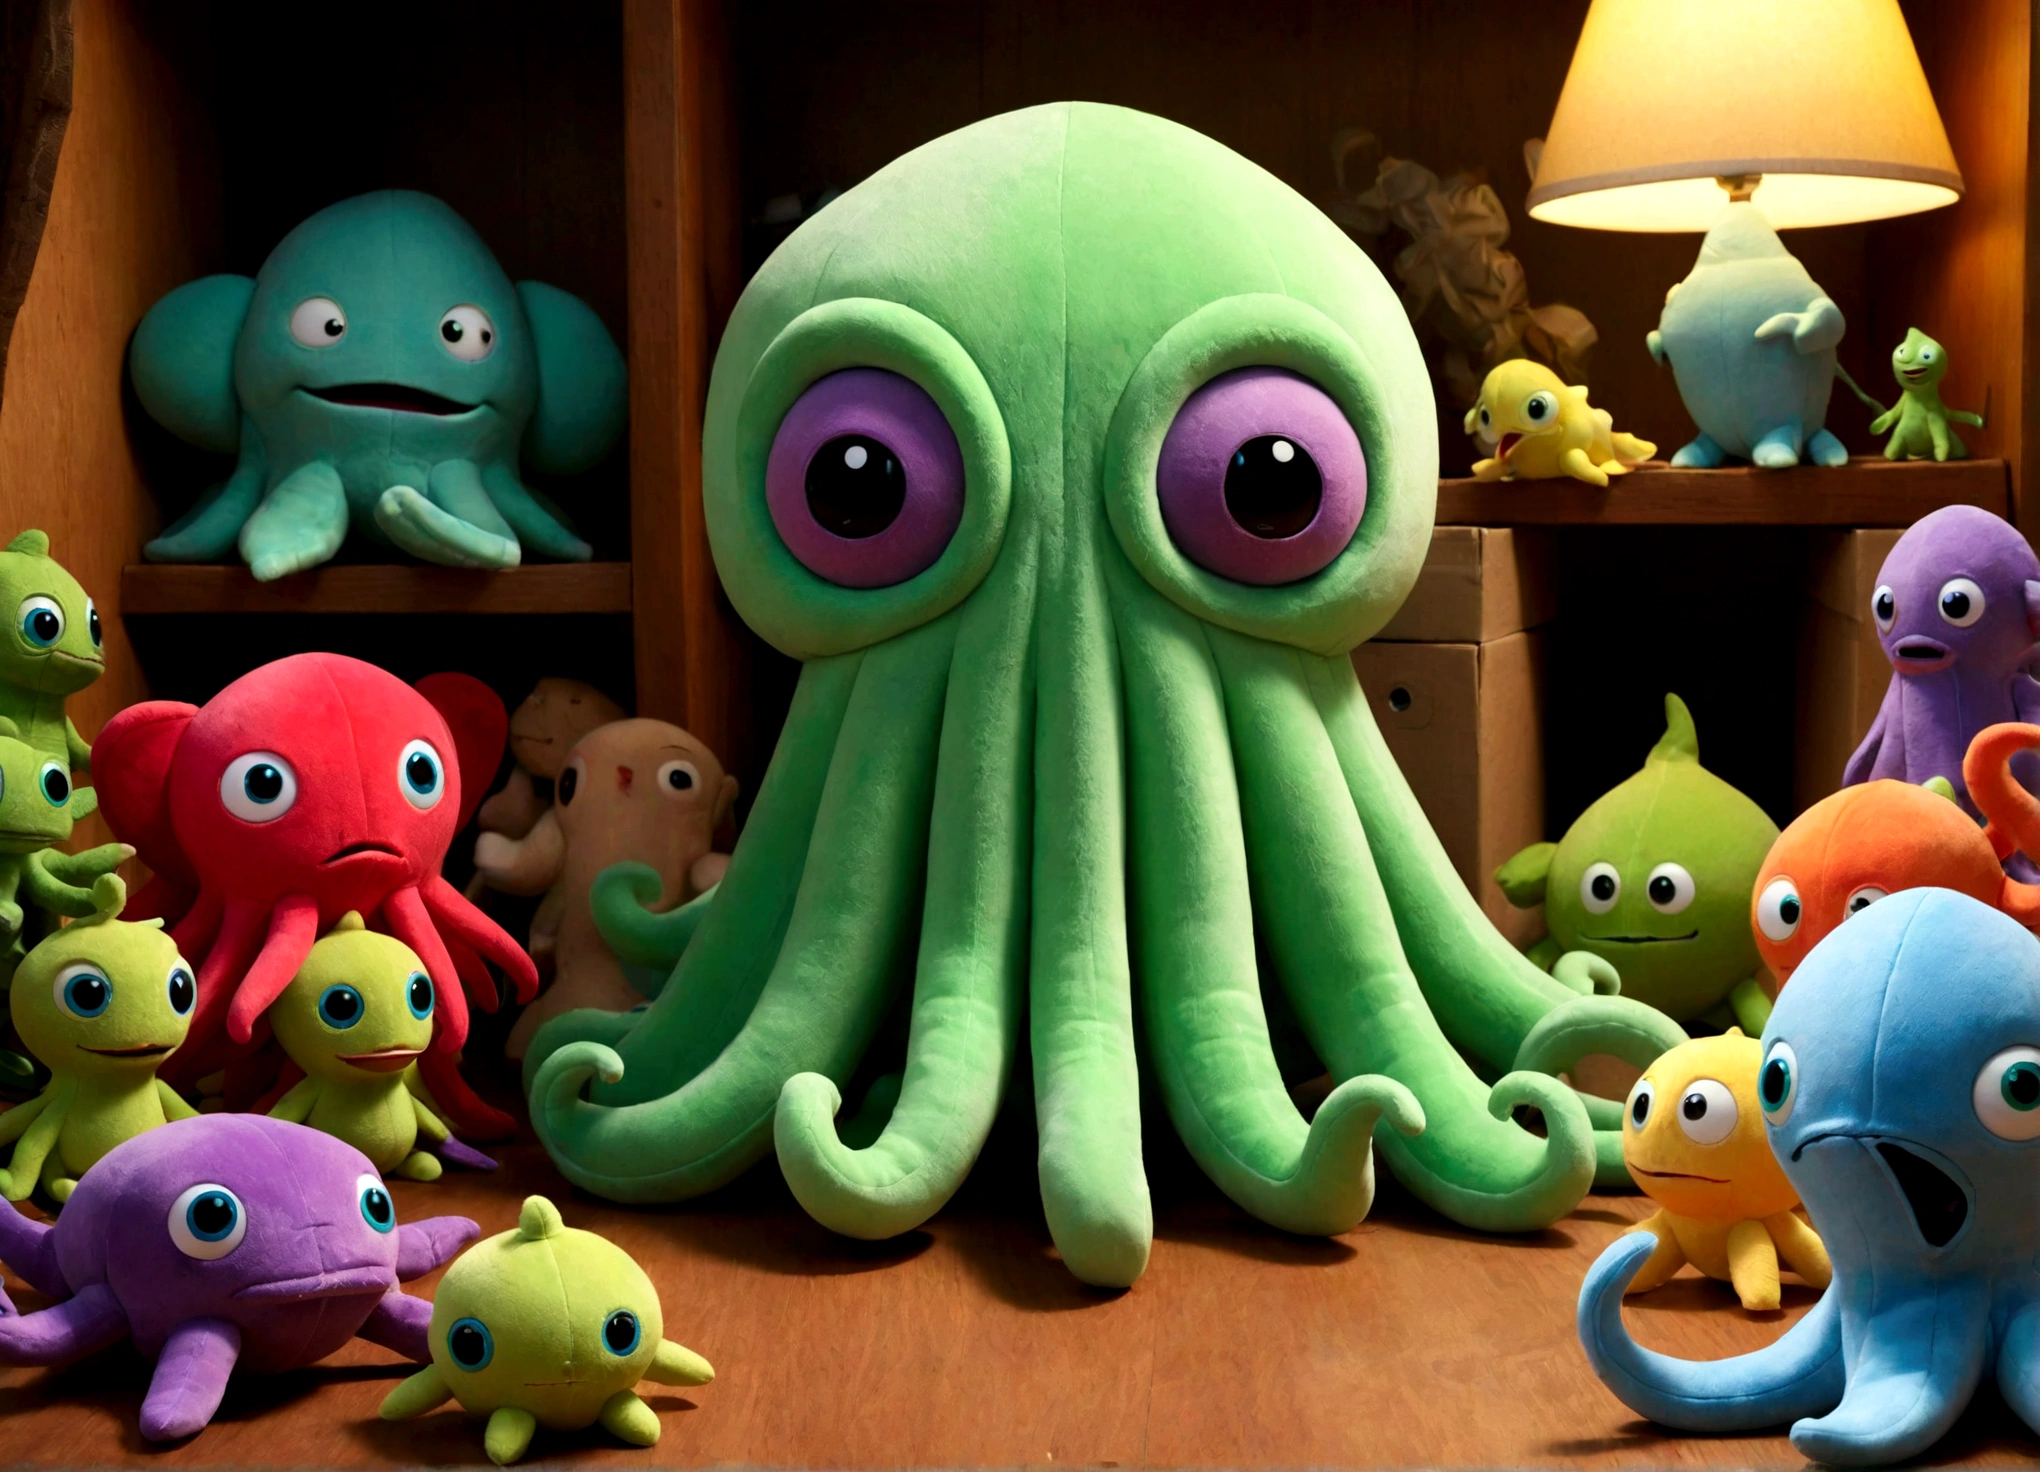 Pixar style plushy Cthulu rising from Andy's toybox to destroy the cast of Toy Story